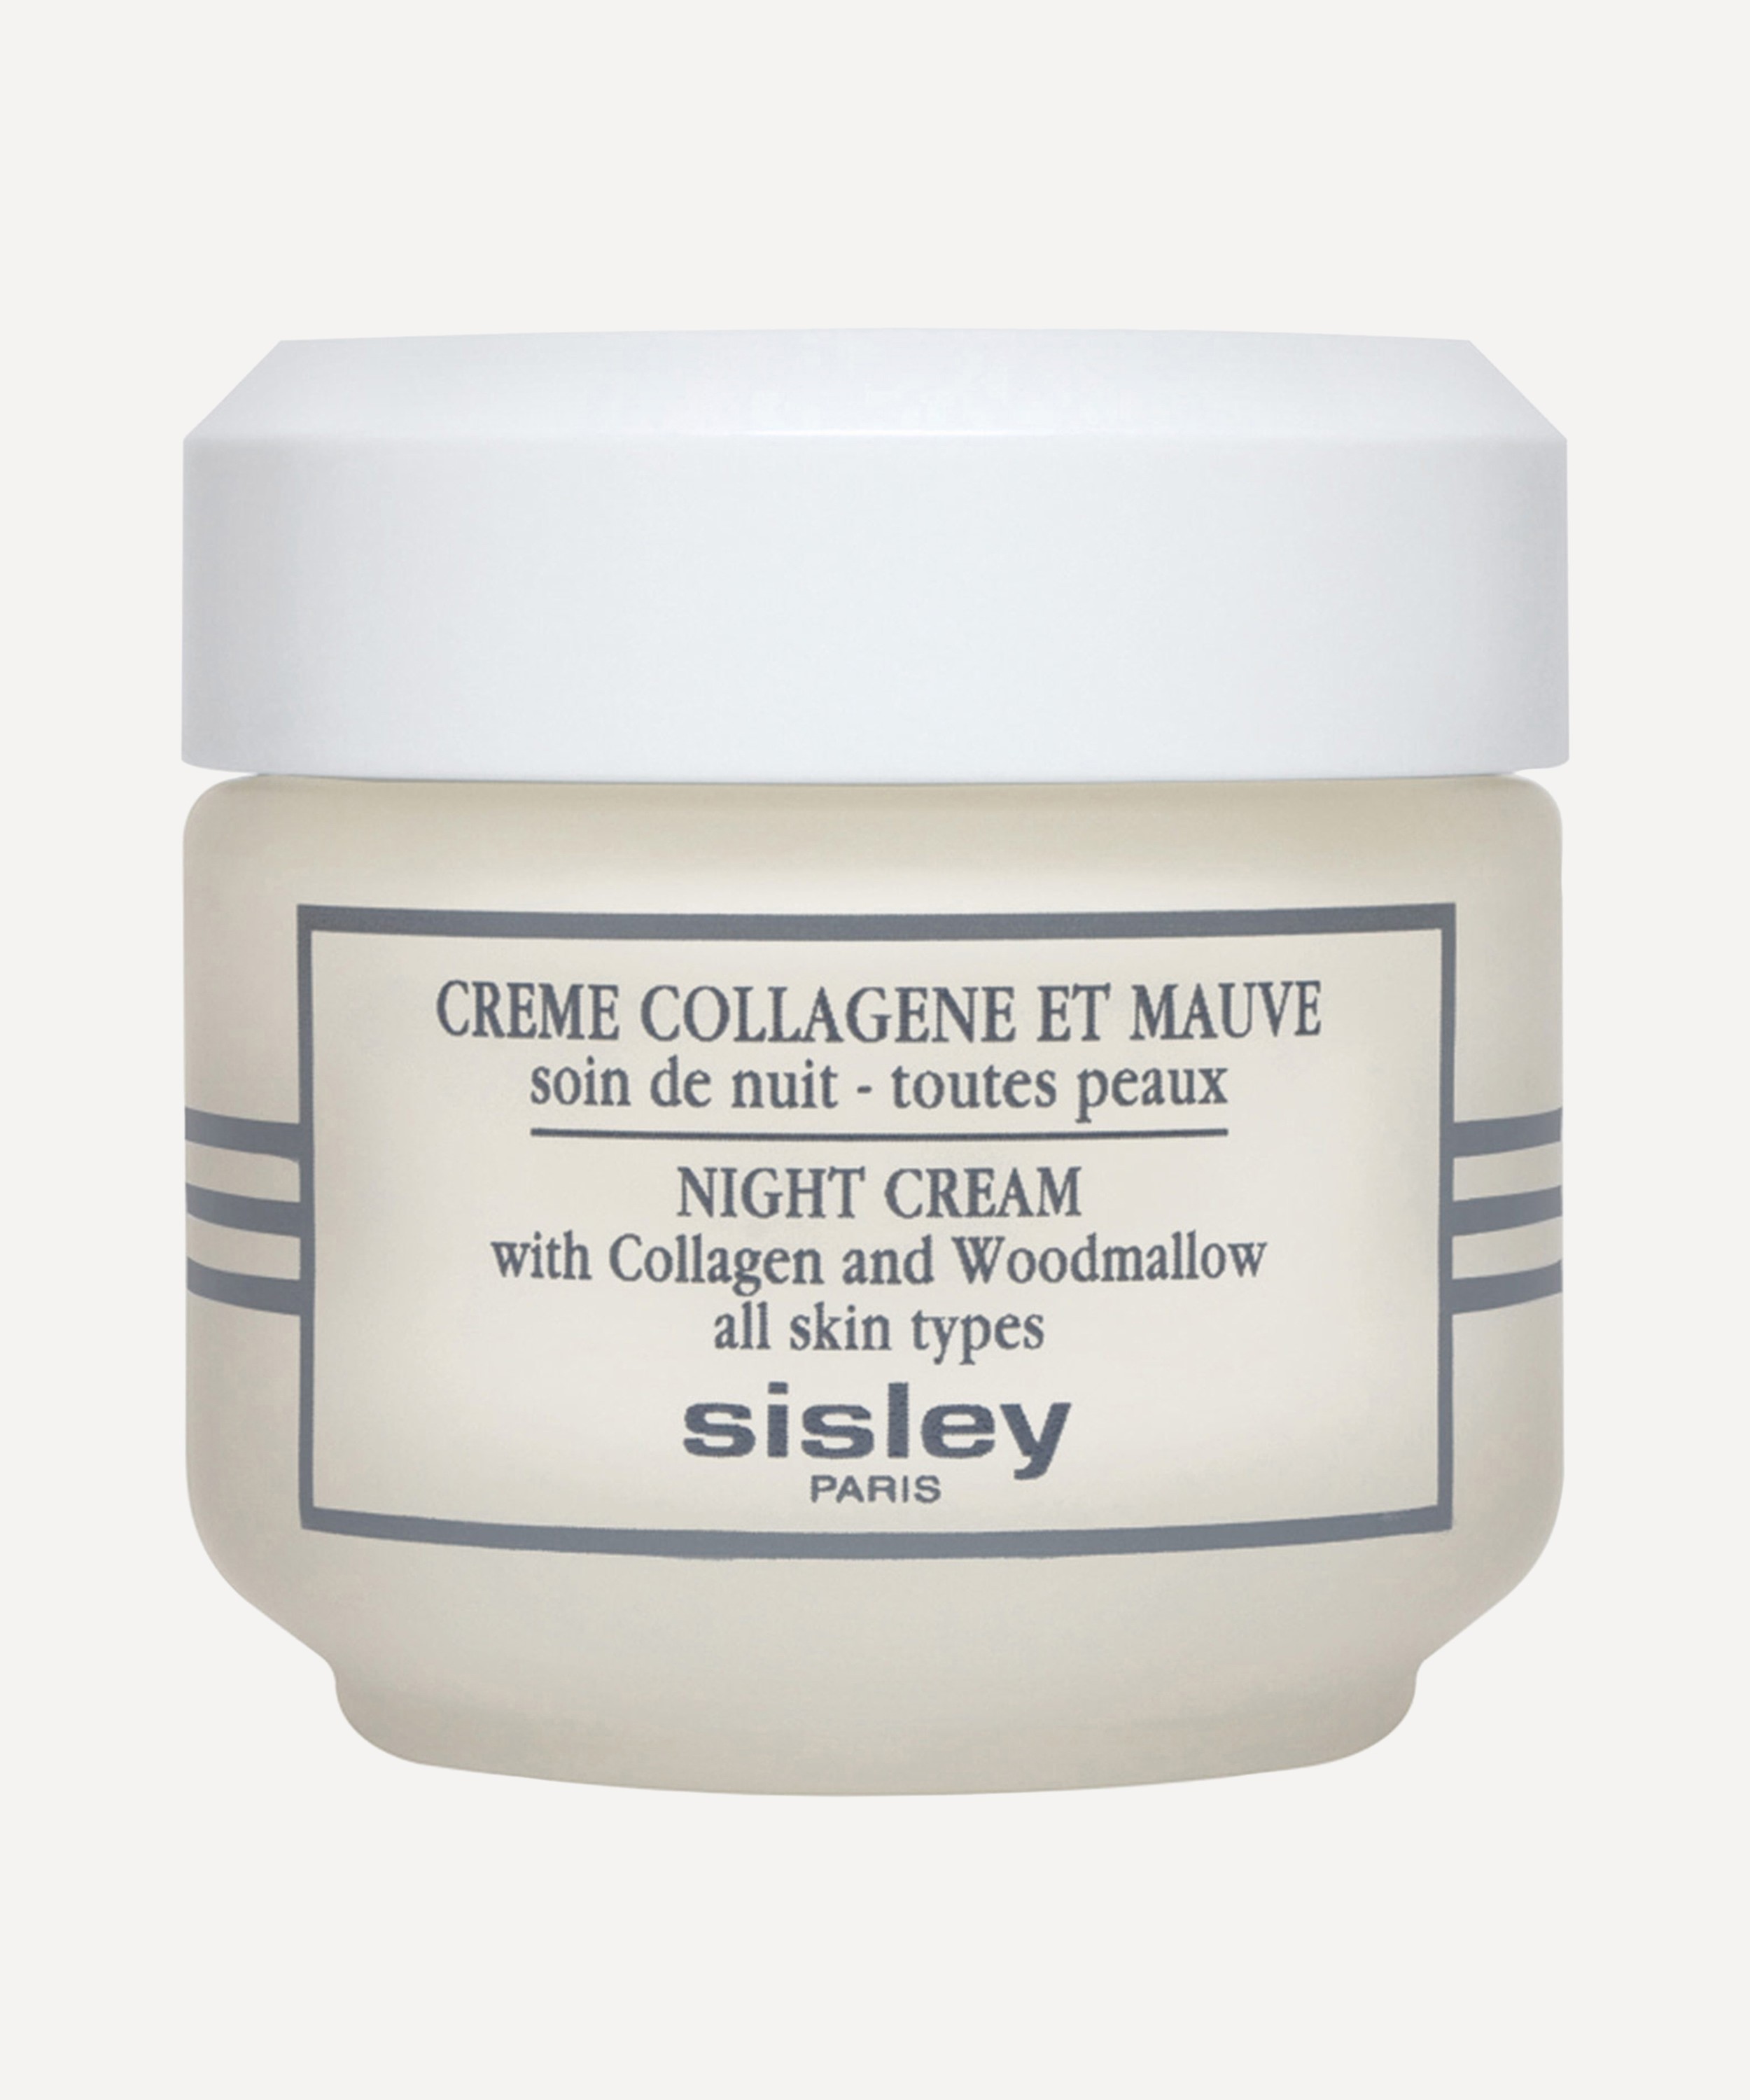 Sisley Paris - Night Cream with Collagen and Woodmallow 50ml image number 0